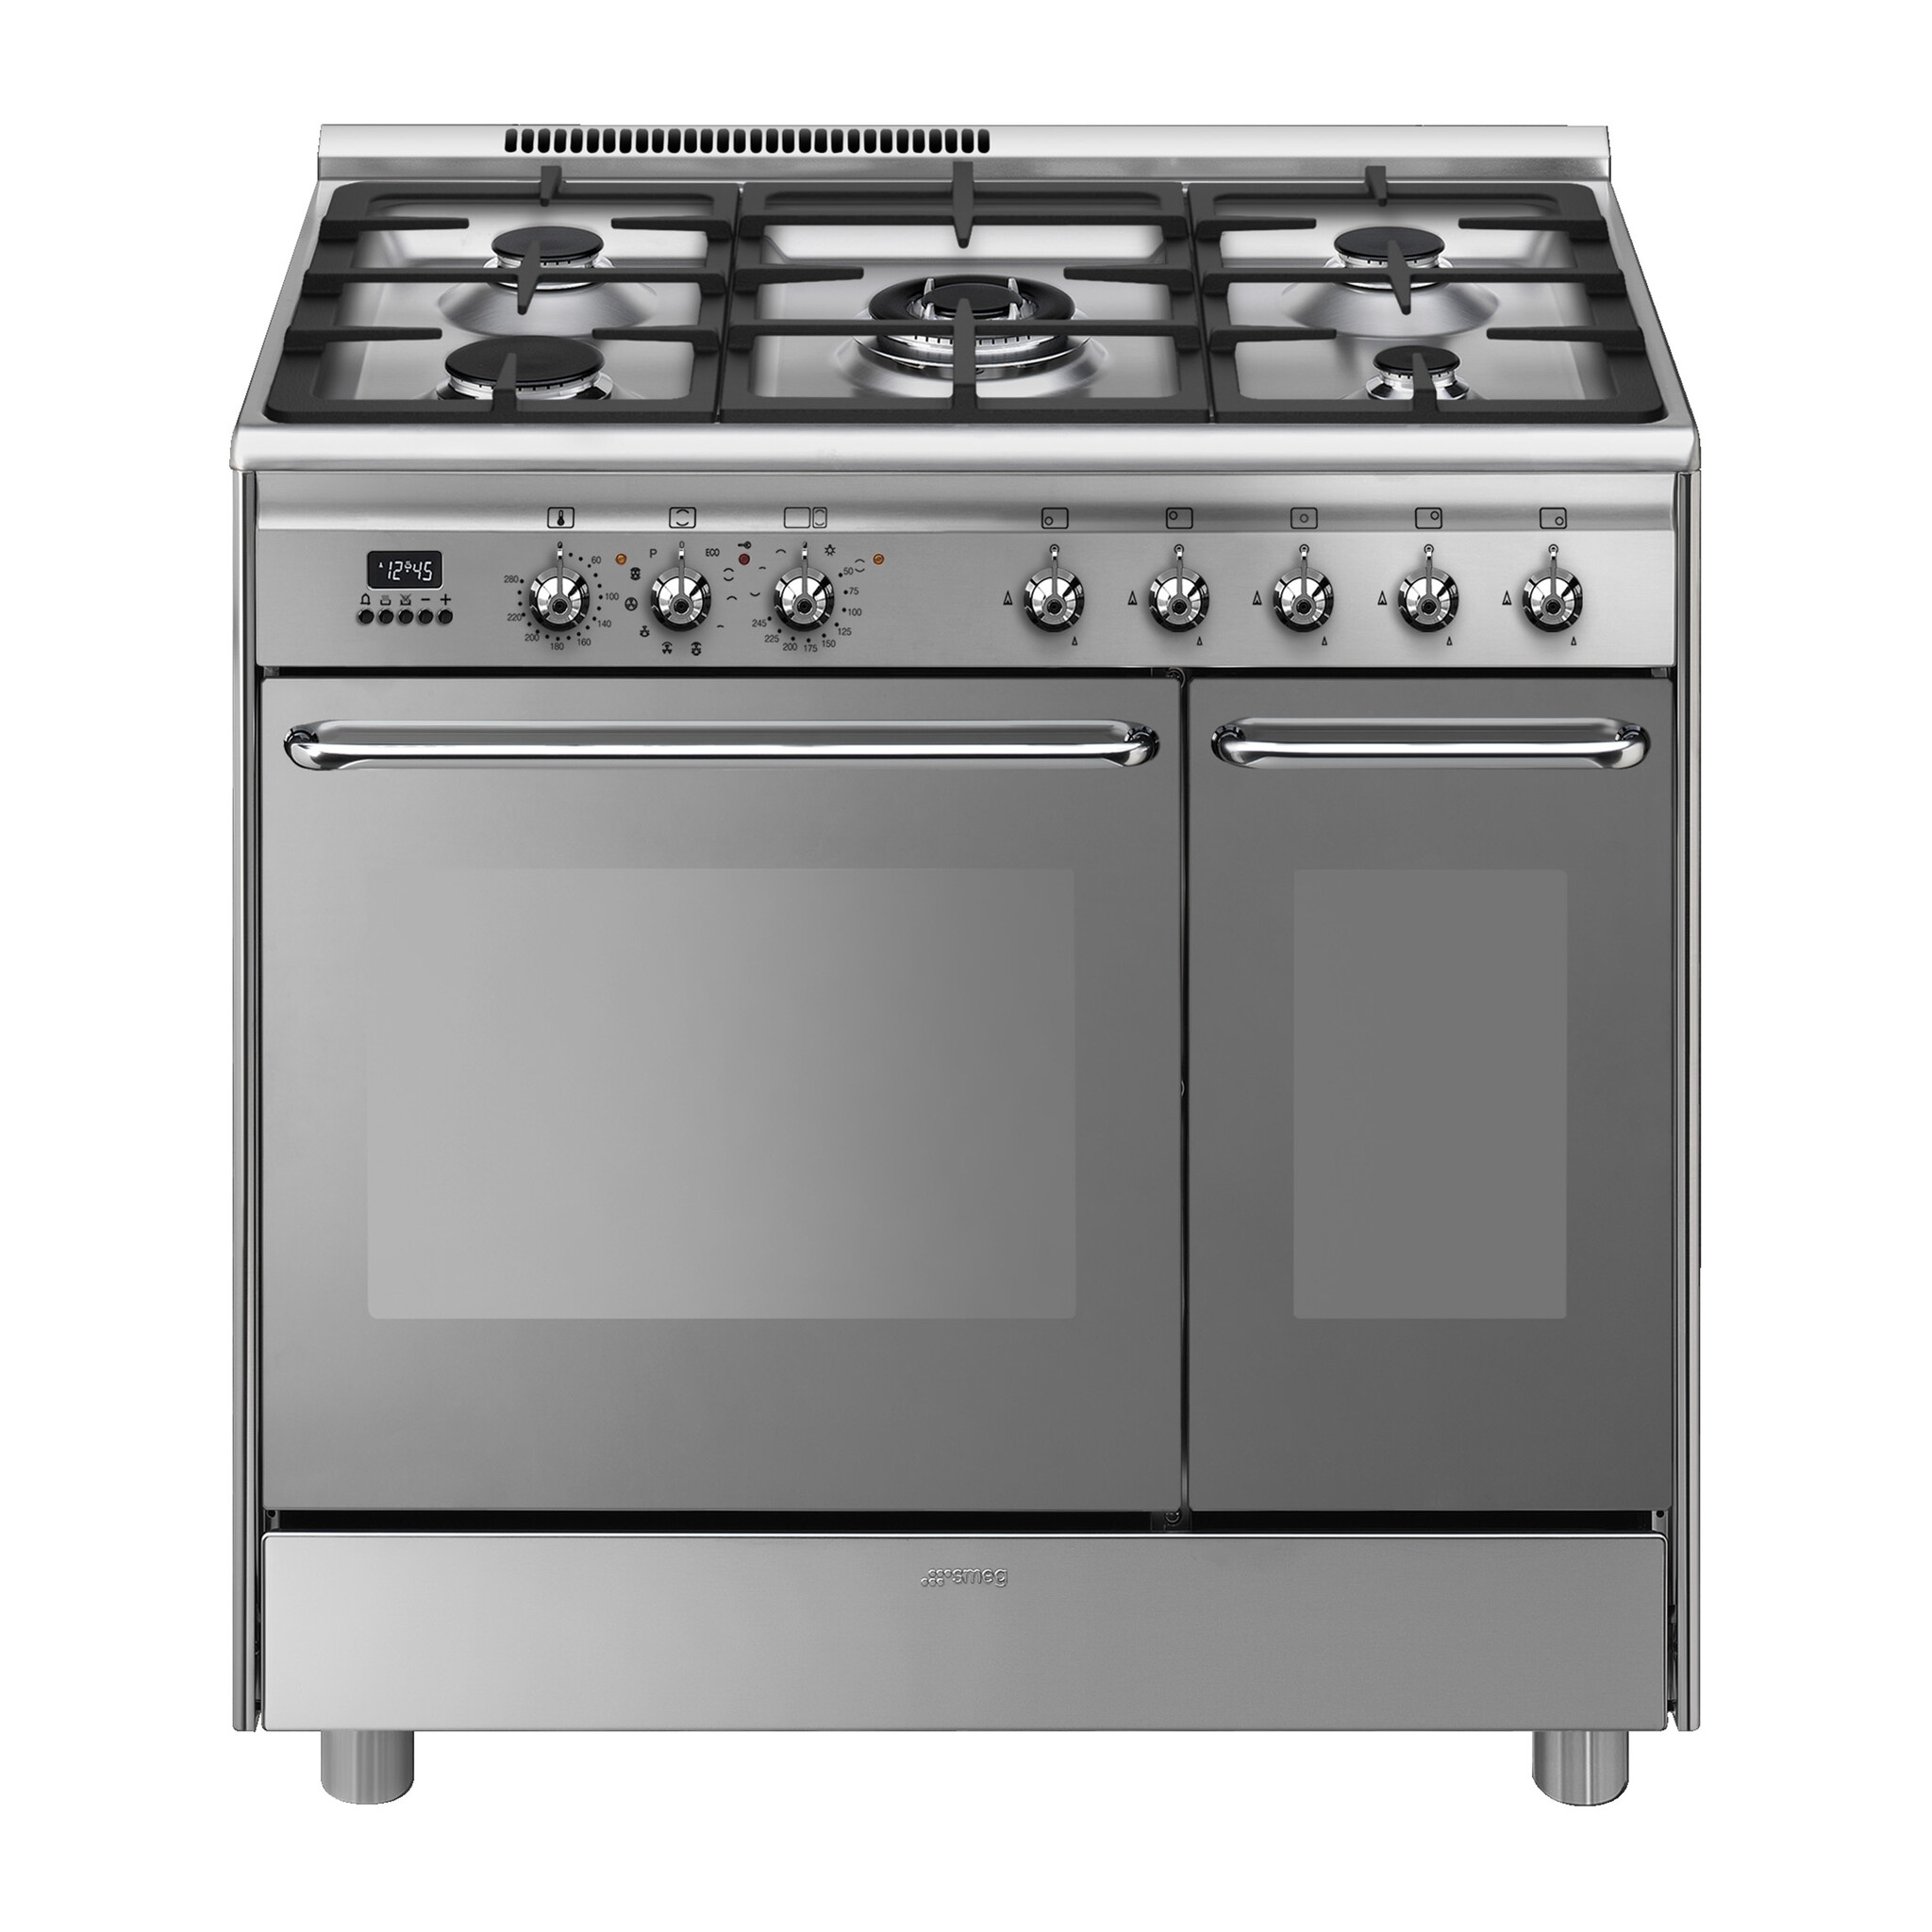 Smeg CG92PX9 90cm Dual Fuel Range Cooker – Stainless Steel – A/A Rated #365447